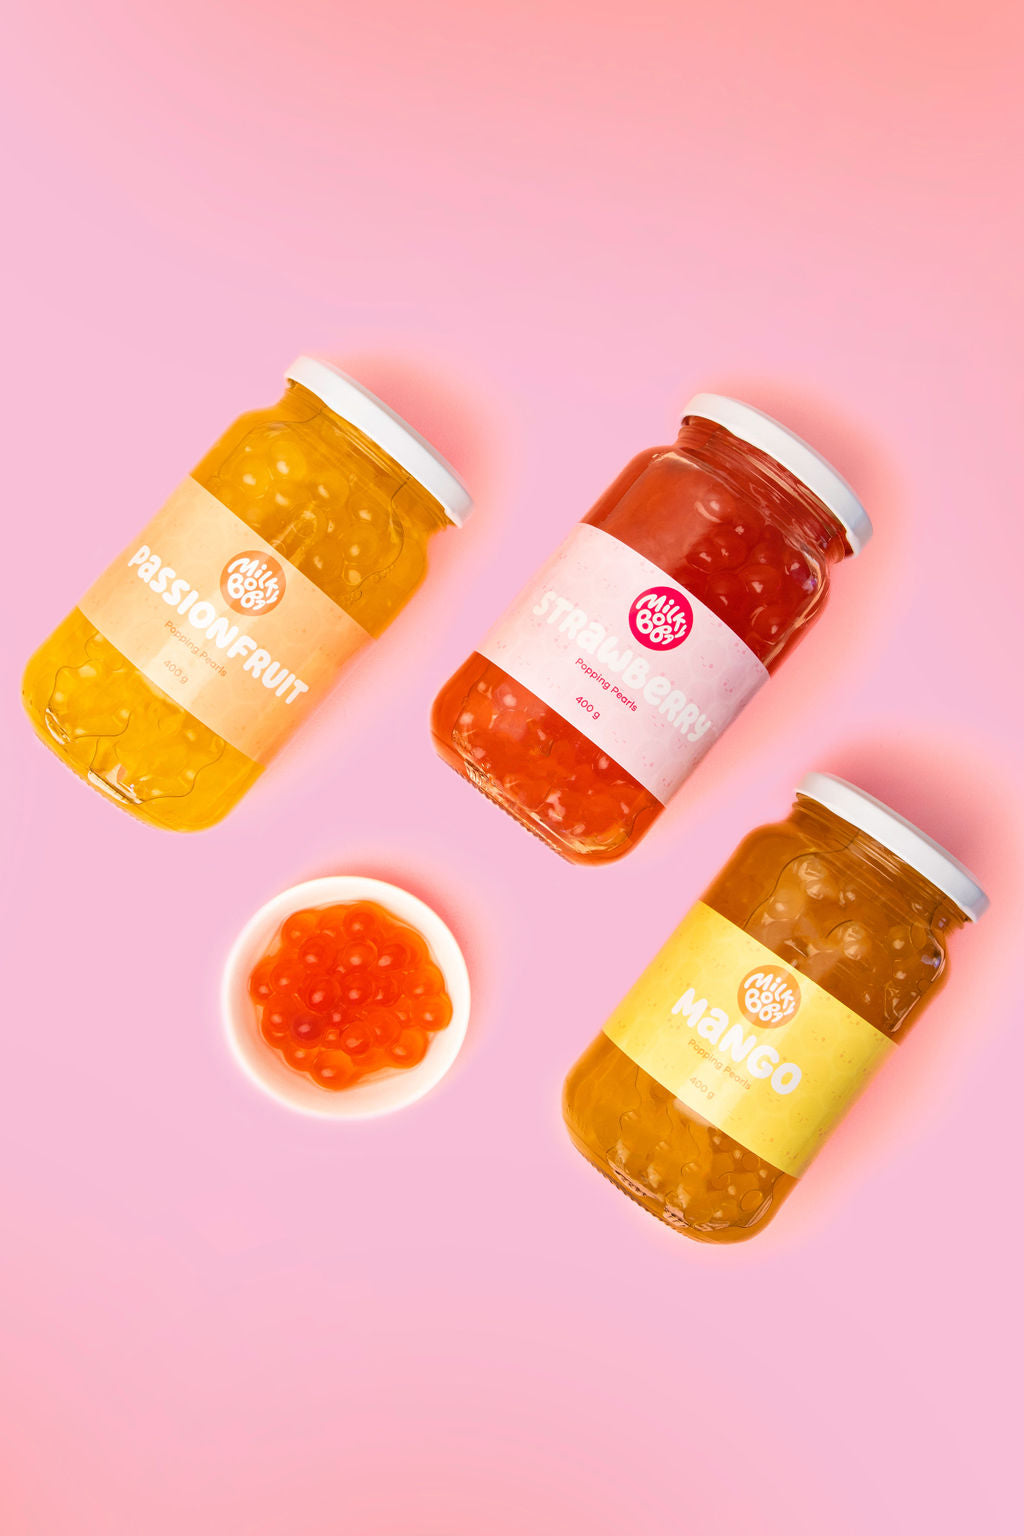 Strawberry, Mango, and Passionfruit Popping Pear Jars